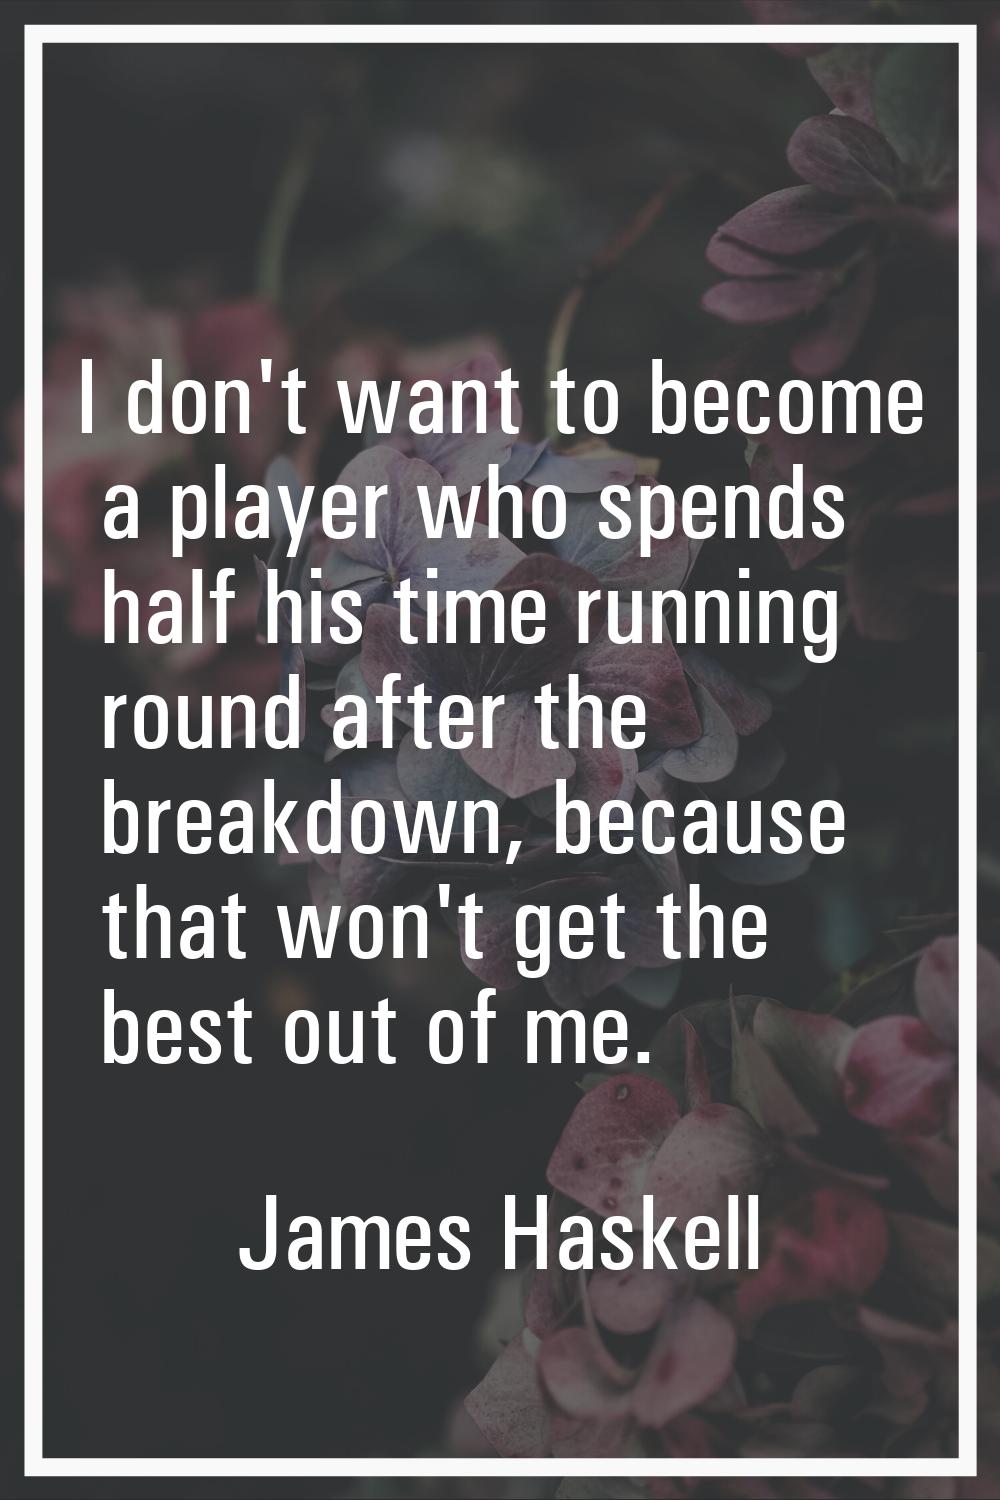 I don't want to become a player who spends half his time running round after the breakdown, because